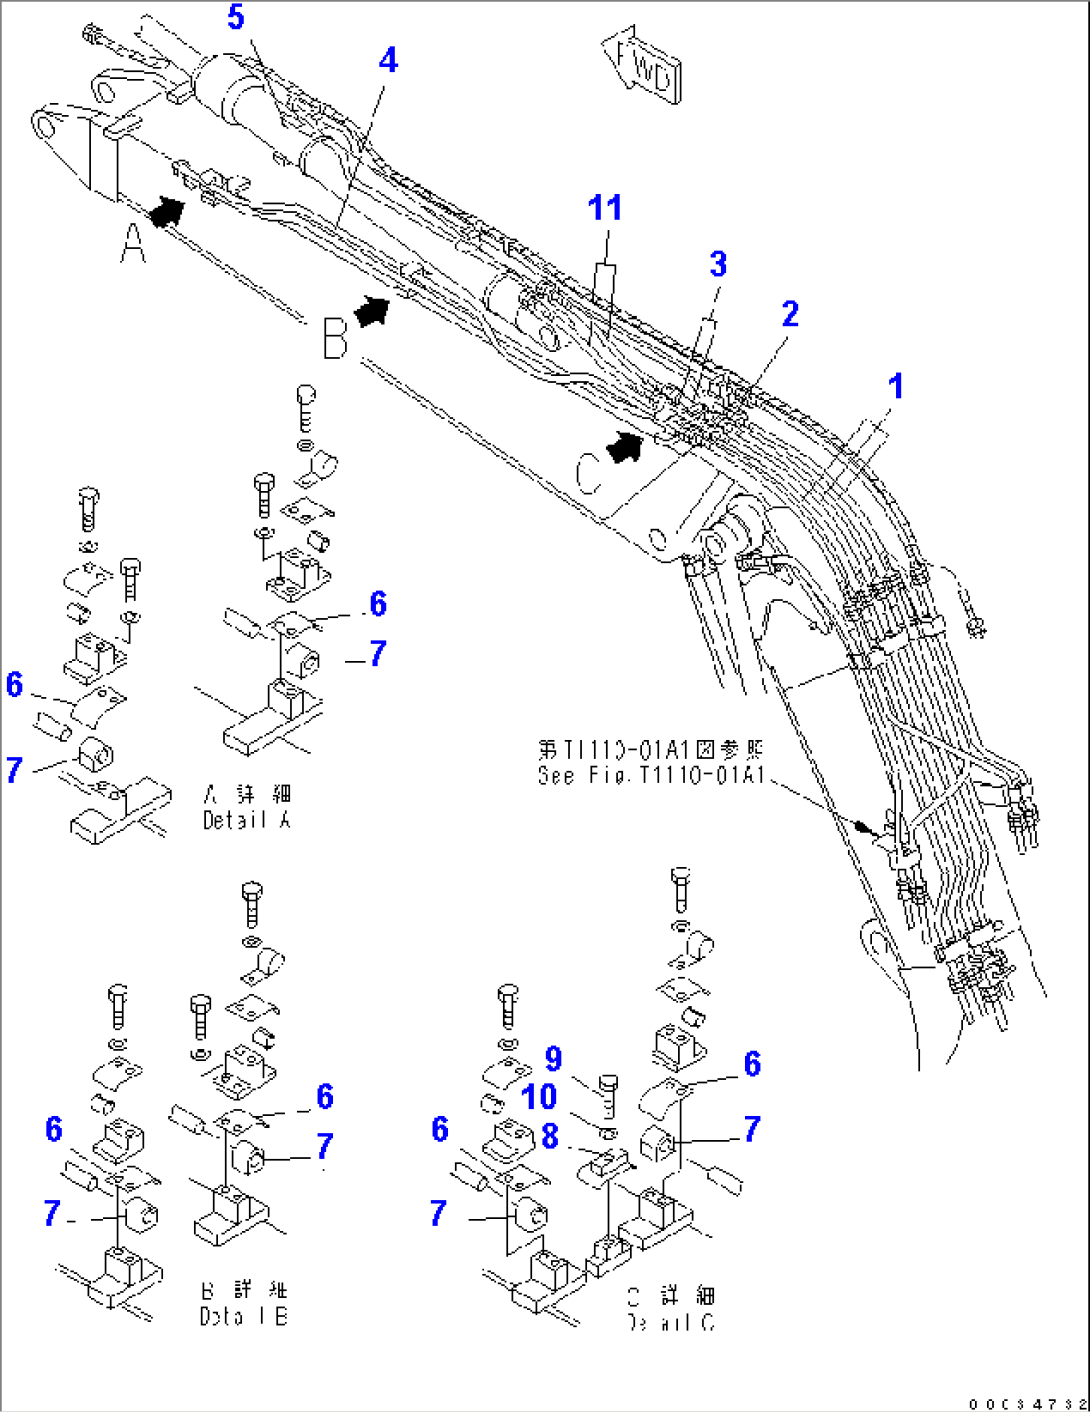 2-PIECE BOOM (2ST BOOM PIPING) (1/2) (FOR ROTARY ARM)